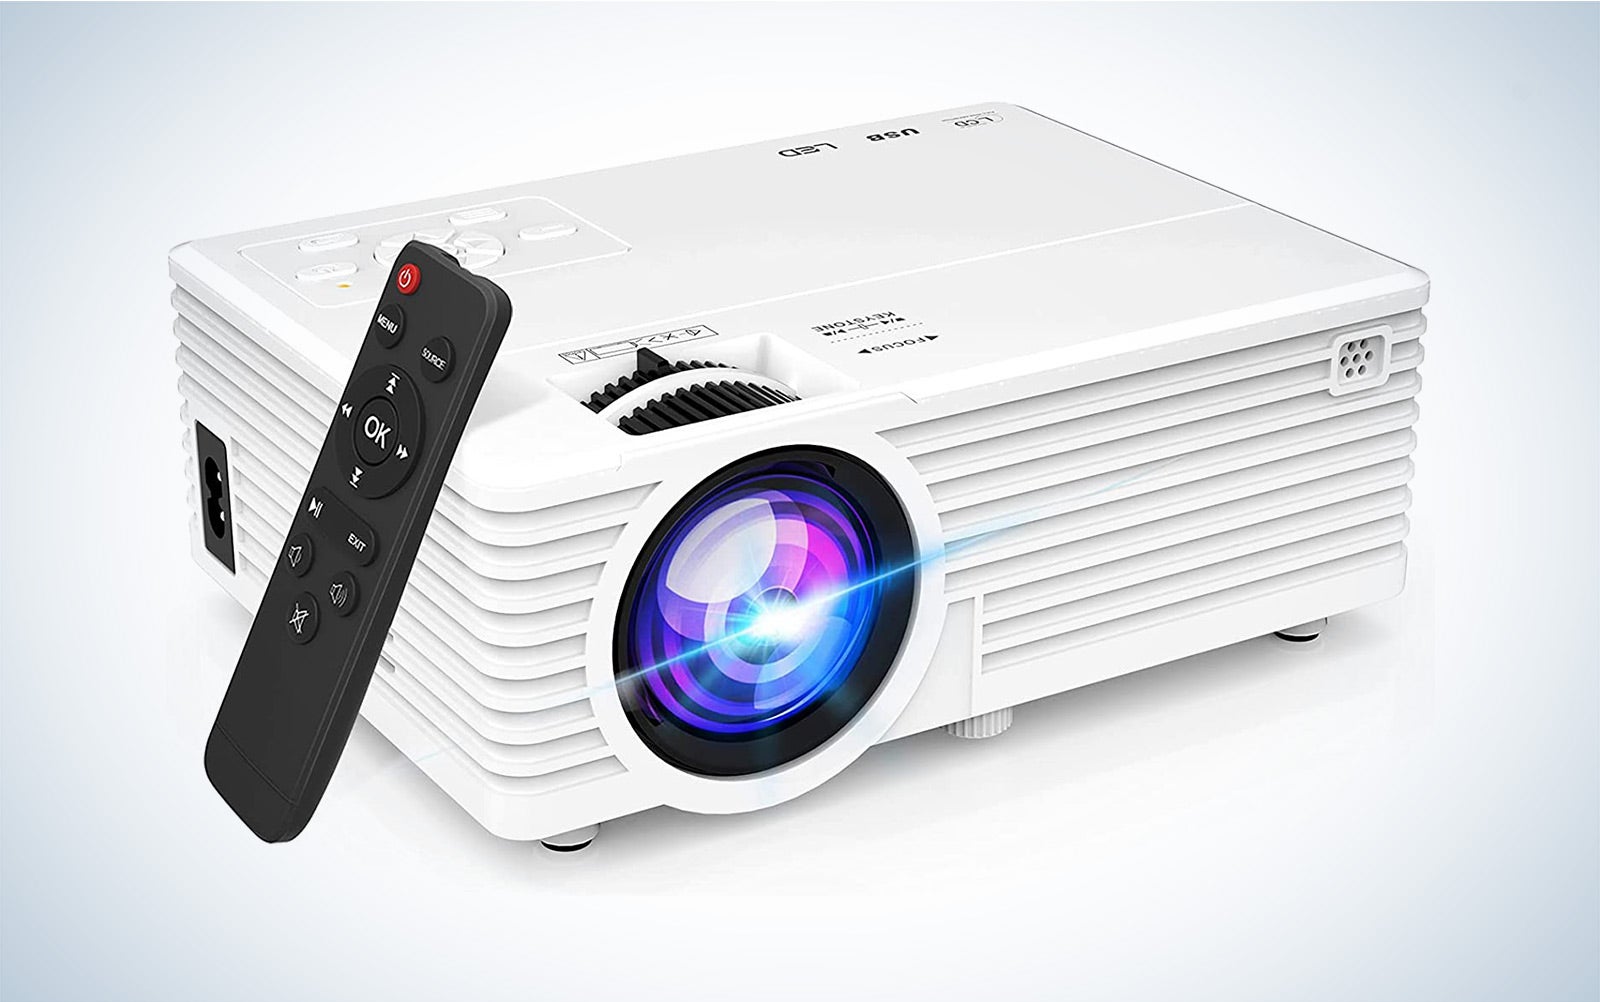 The Jinou Mini Projector is the best budget projector.